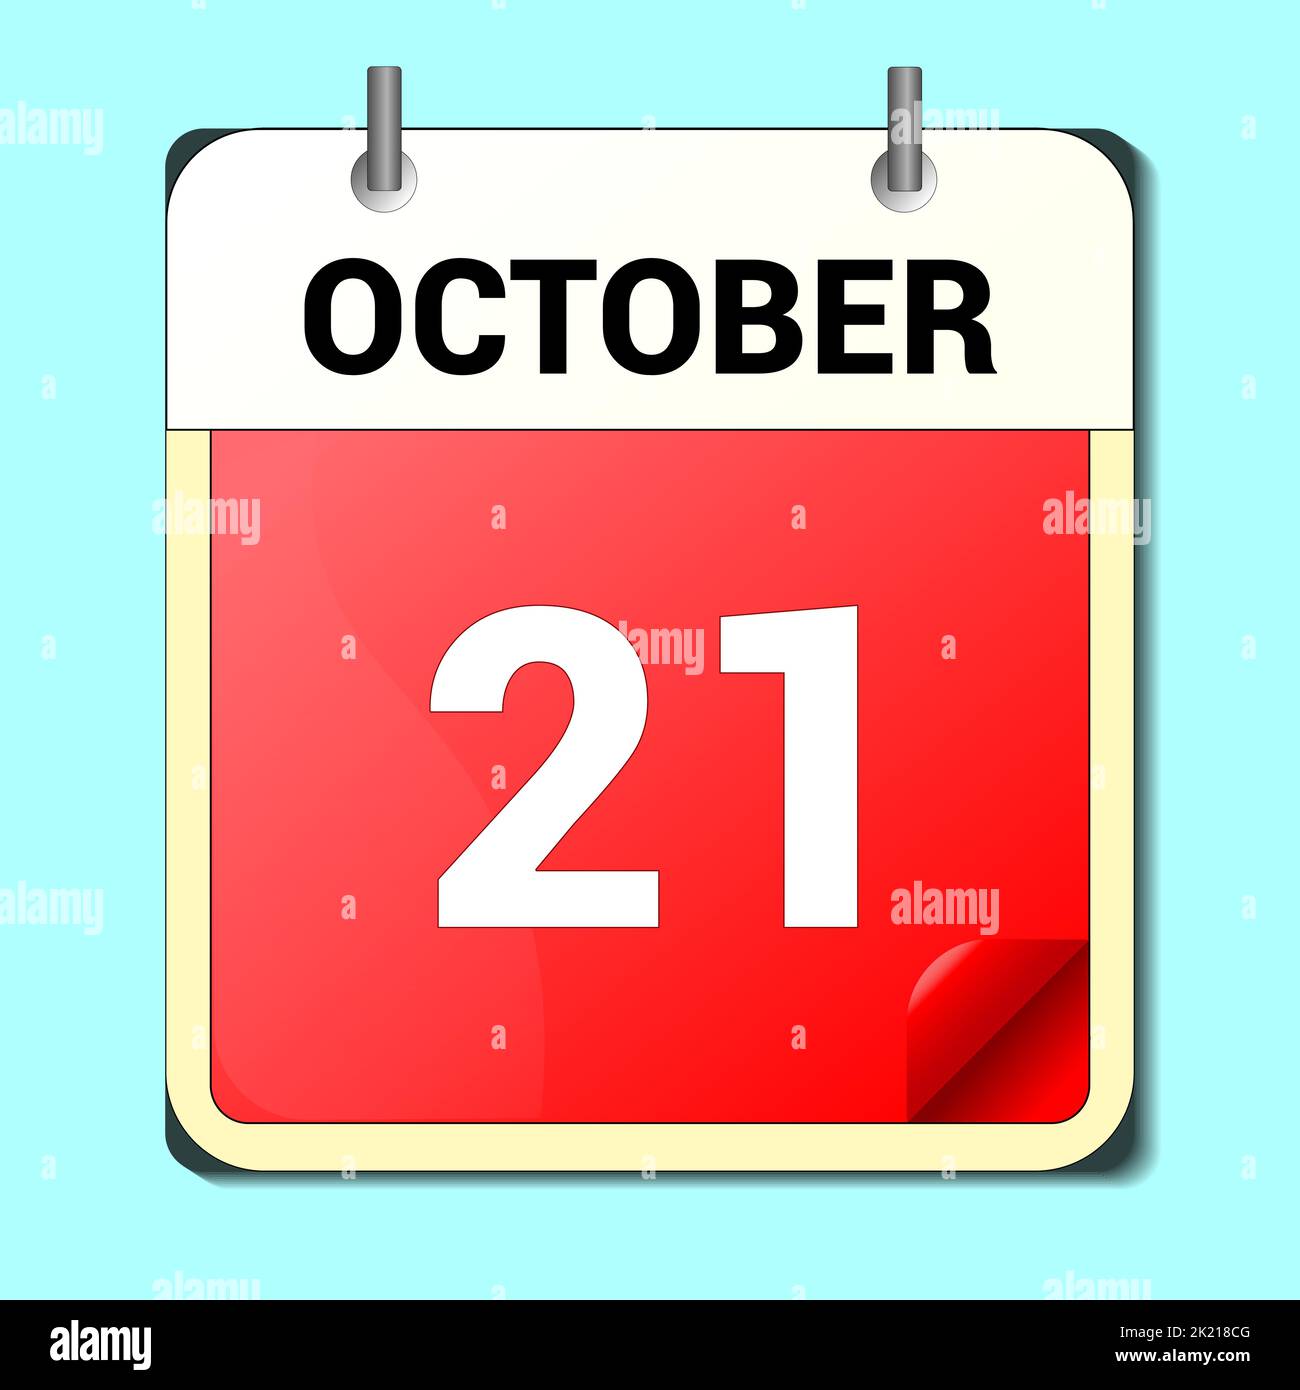 day on the calendar, vector image format, october Stock Vector